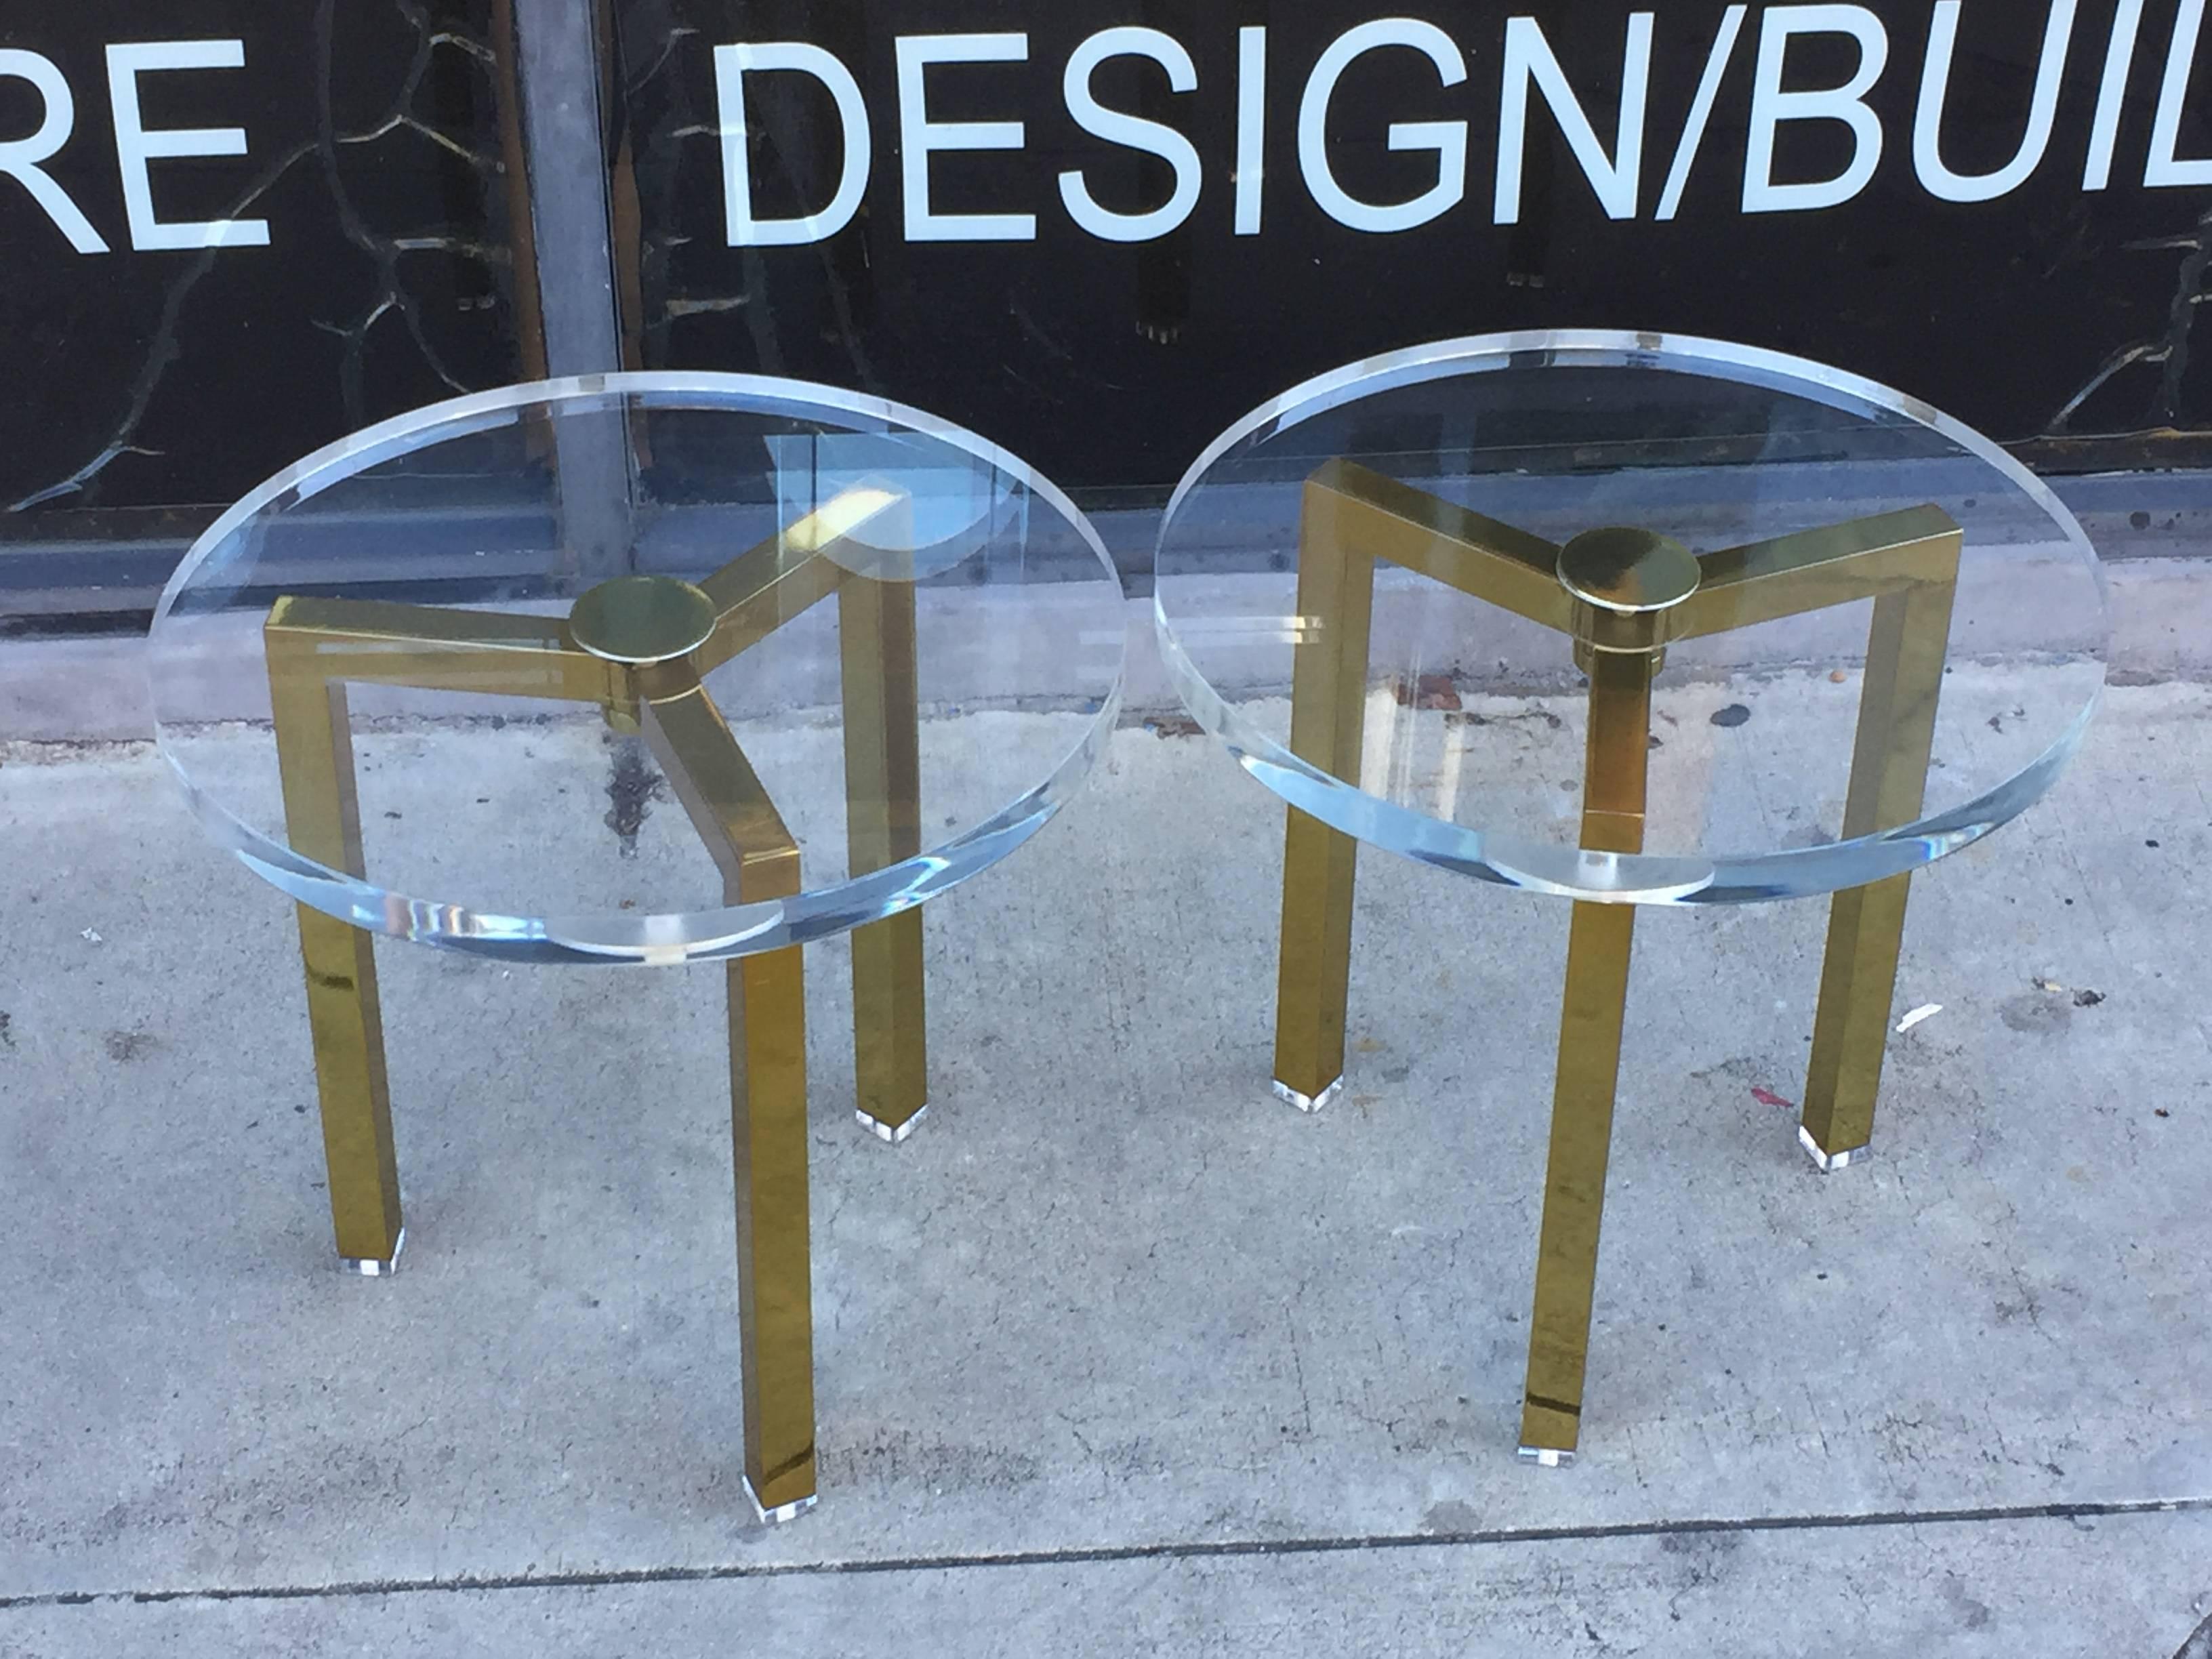 Beautiful pair of brass and Lucite side tables designed by Charles Hollis Jones for Arthur Elrod.
The tables are made of solid steel and brass plated with a 1 1/2